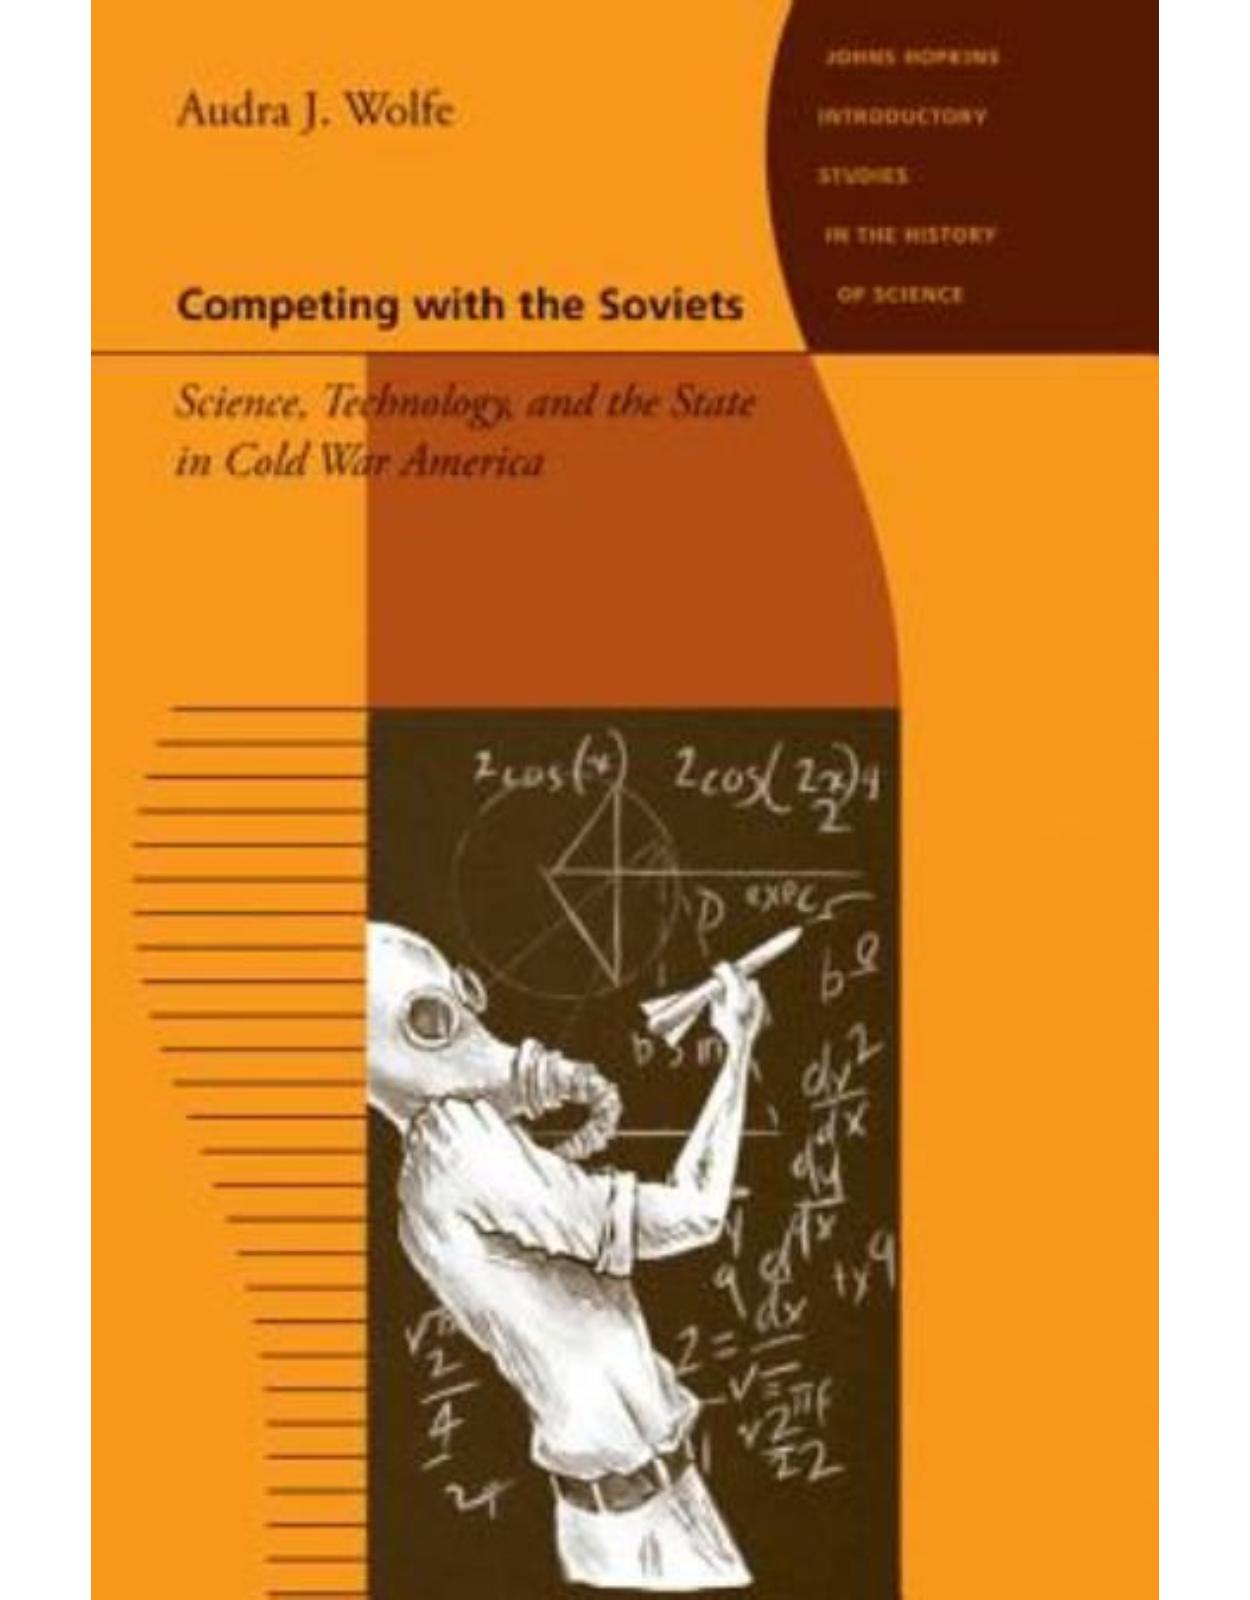 Competing with the Soviets. Science, Technology, and the State in Cold War America